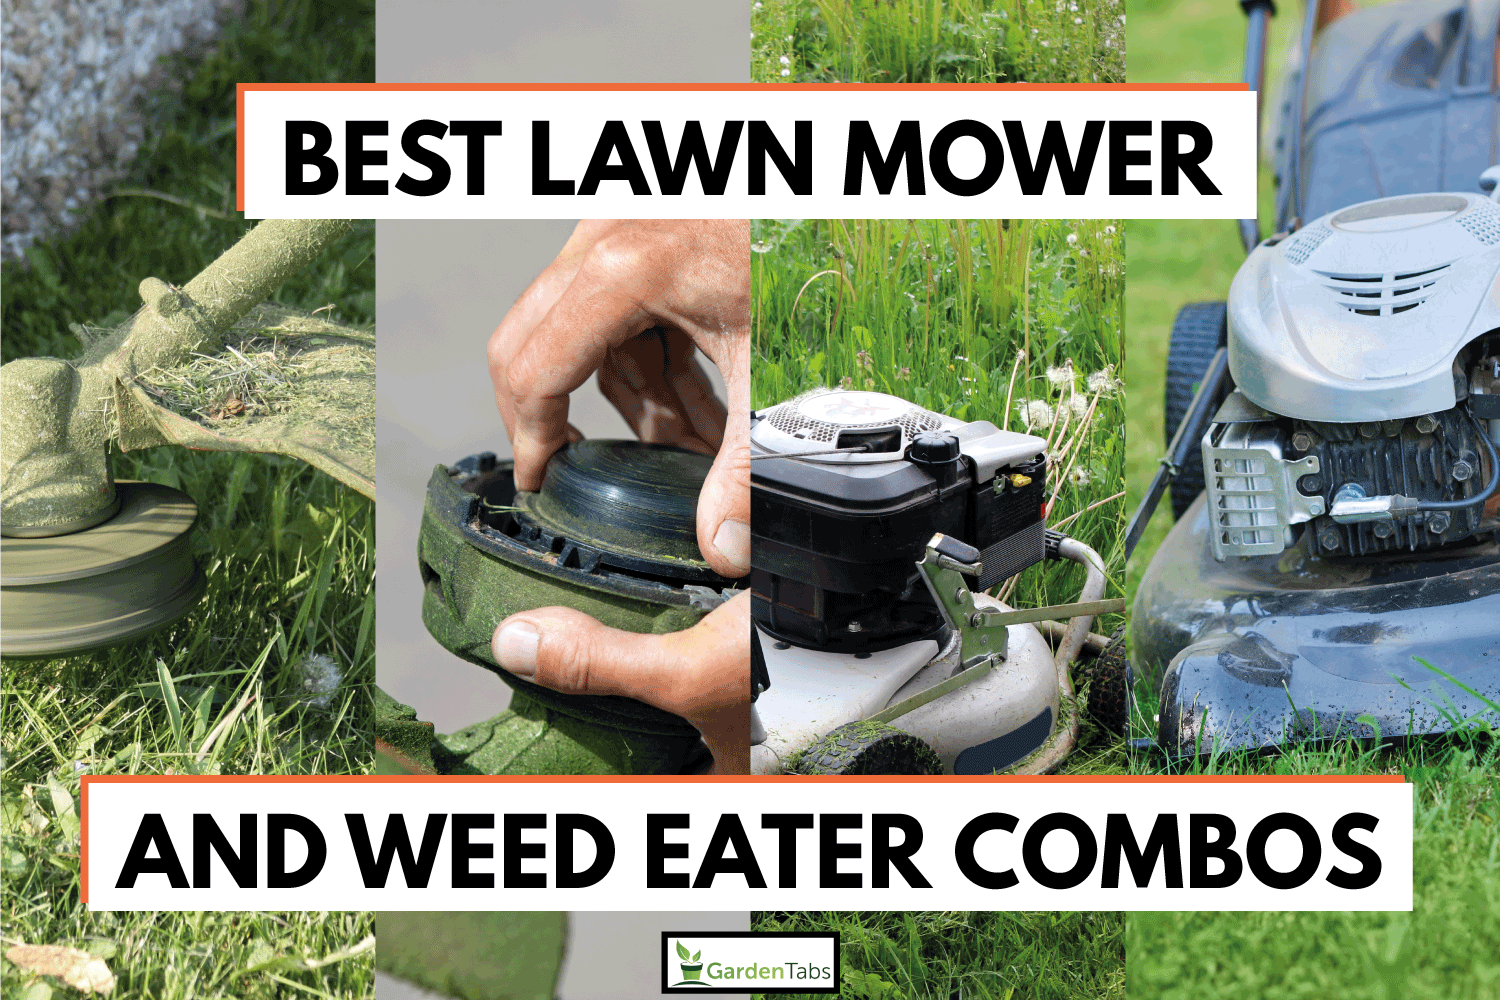 weed eater in action. bump feed line refill of weed eater. lawn mower near dandelions. lawn mower in action. 5 Best Lawn Mower and Weed Eater Combos